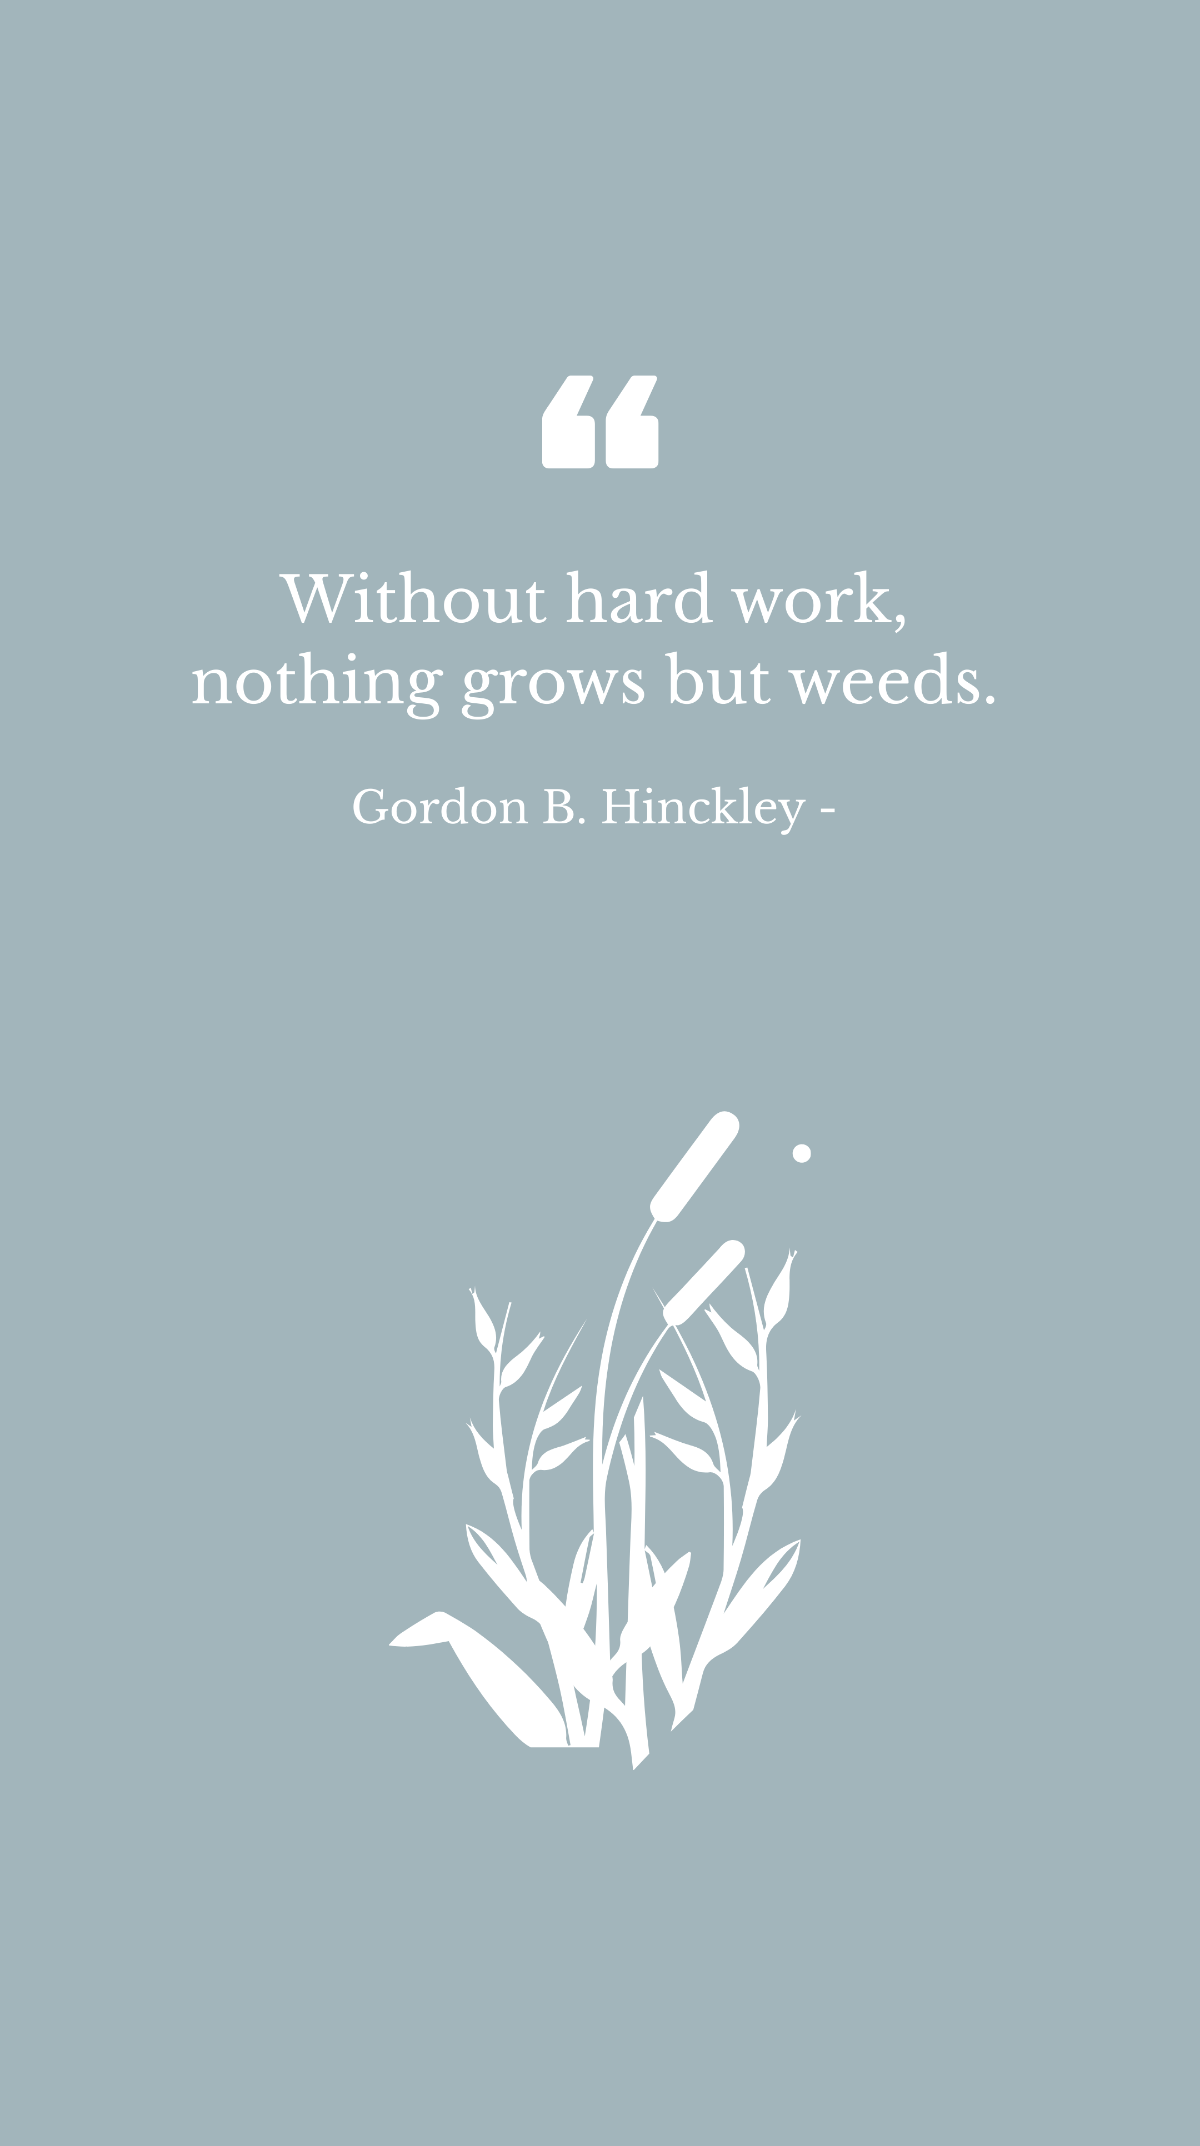 Free Gordon B. Hinckley - Without hard work, nothing grows but weeds. Template